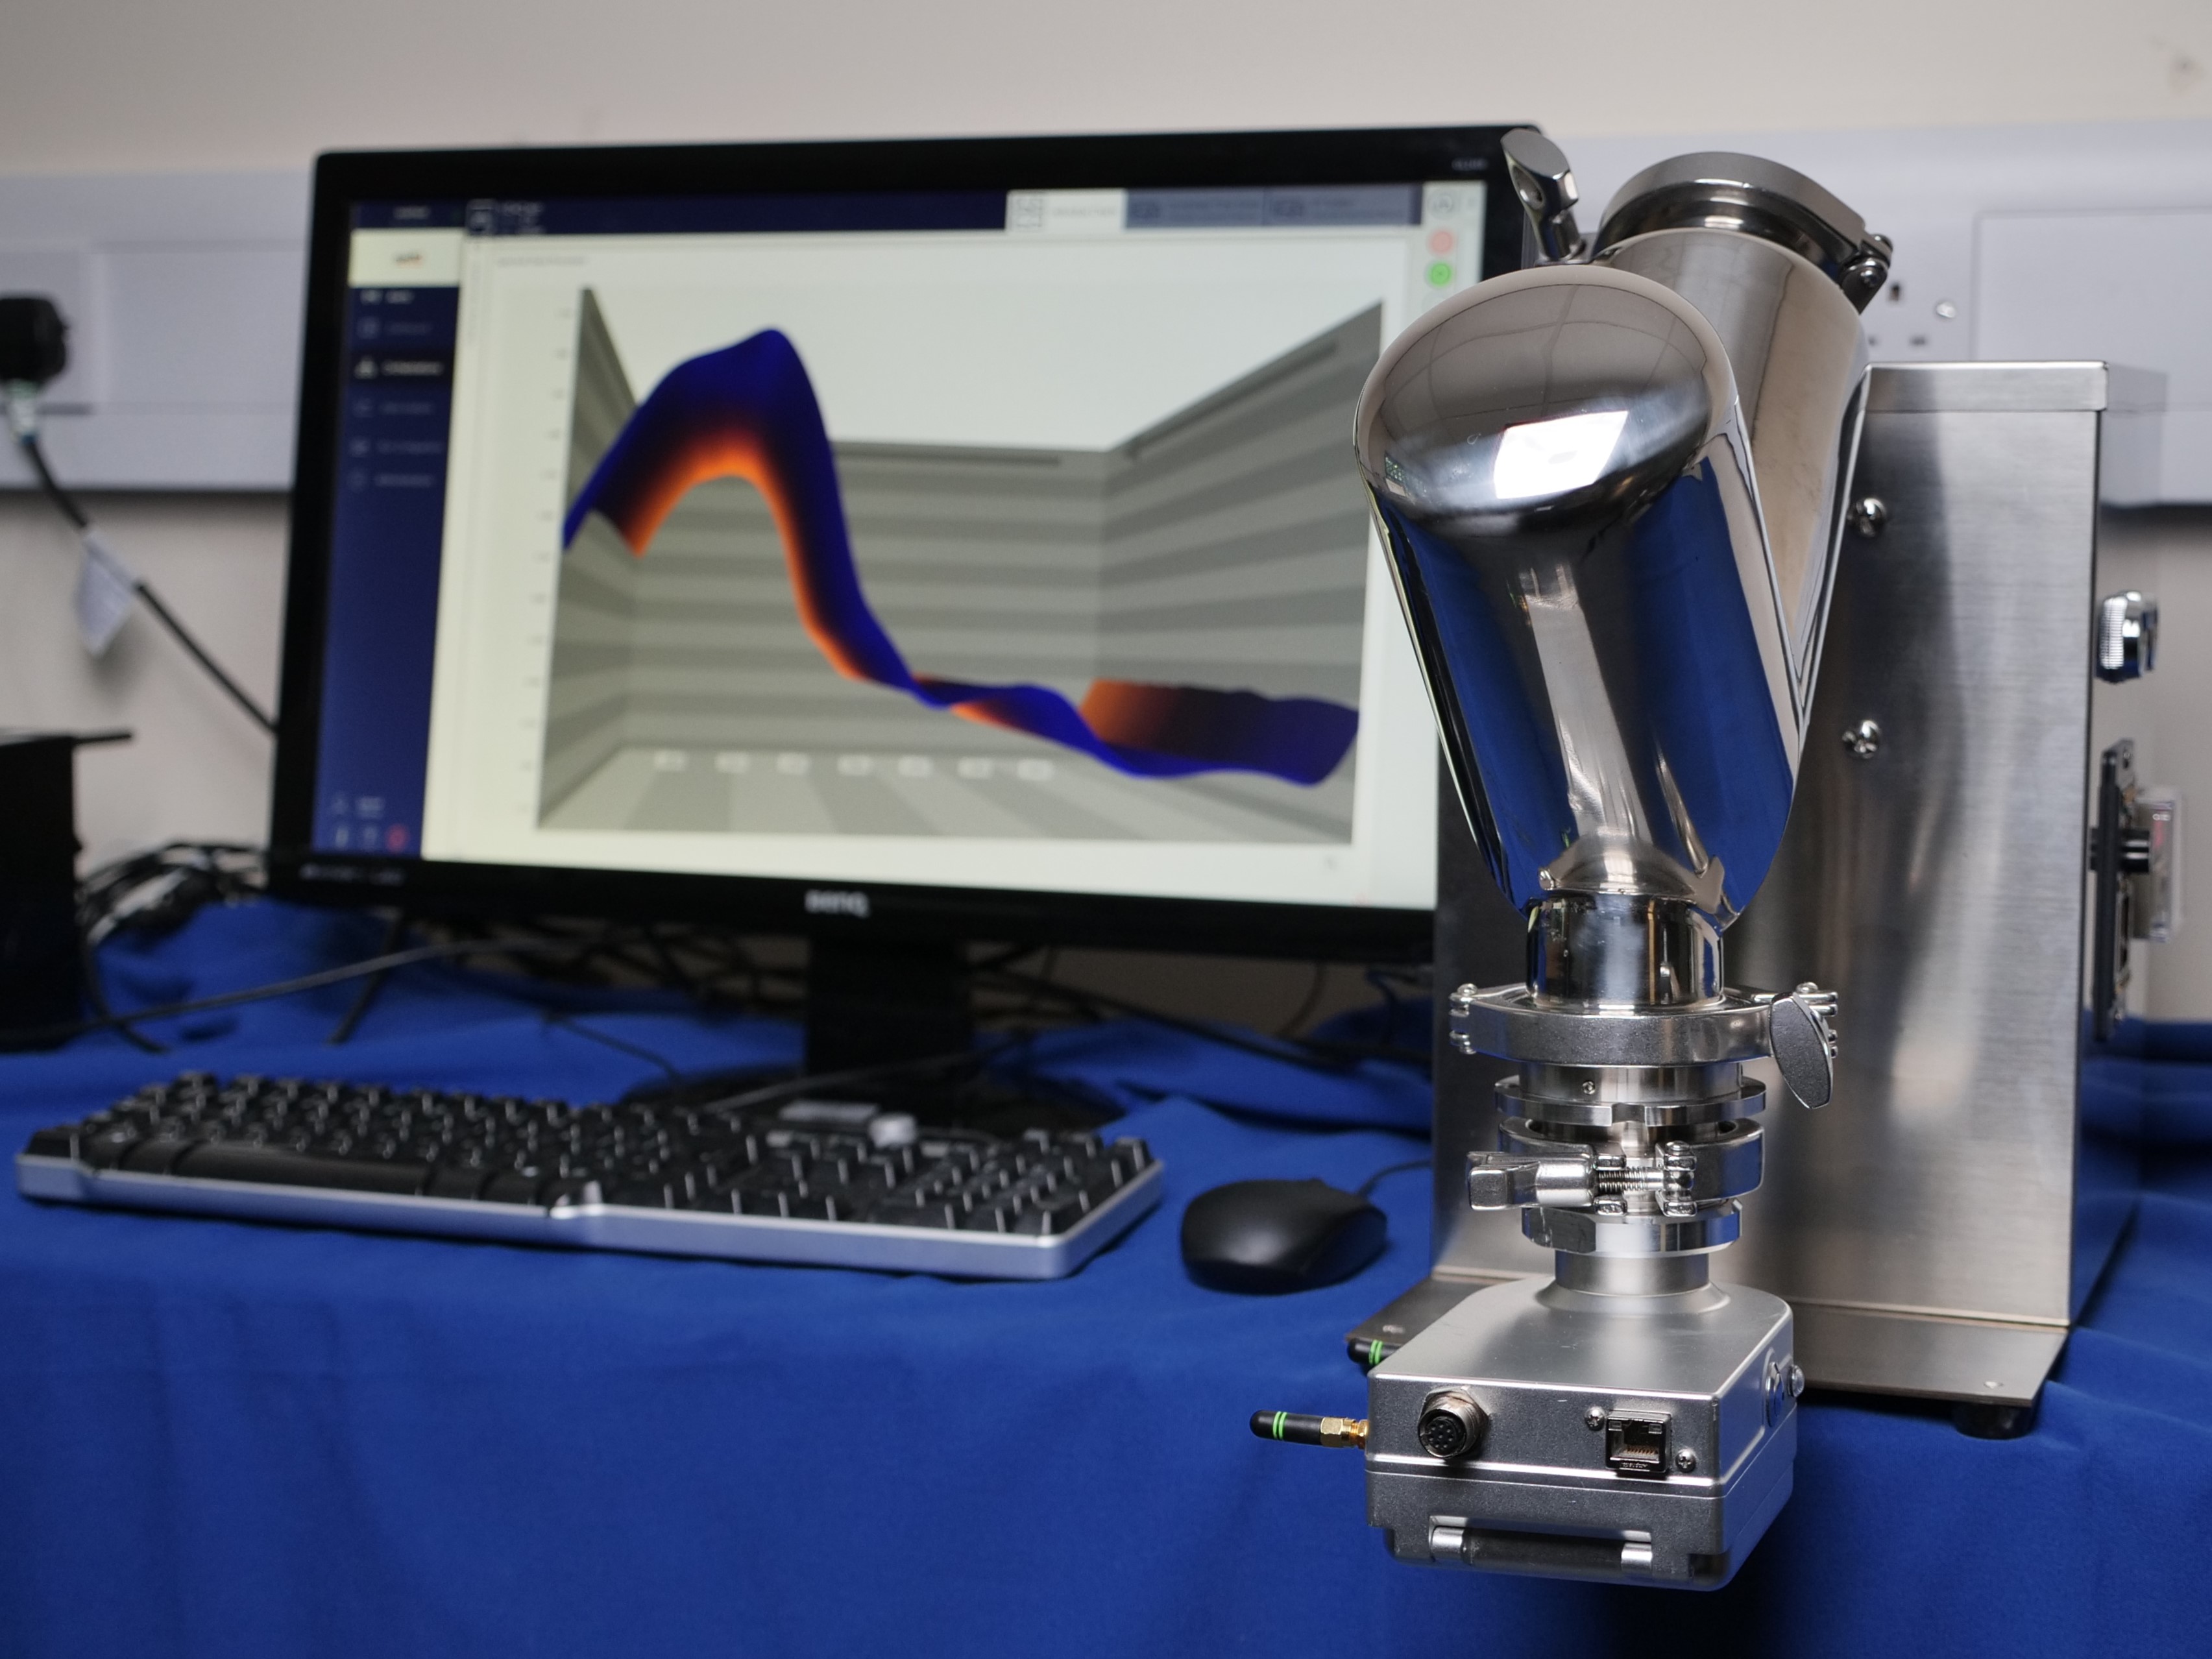 A practical example of a PAT-enabled automated process control framework to optimise blending consists of a batch blender equipped with a near-infrared (NIR) spectrometer on its lid that communicates to a PAT knowledge manager platform.